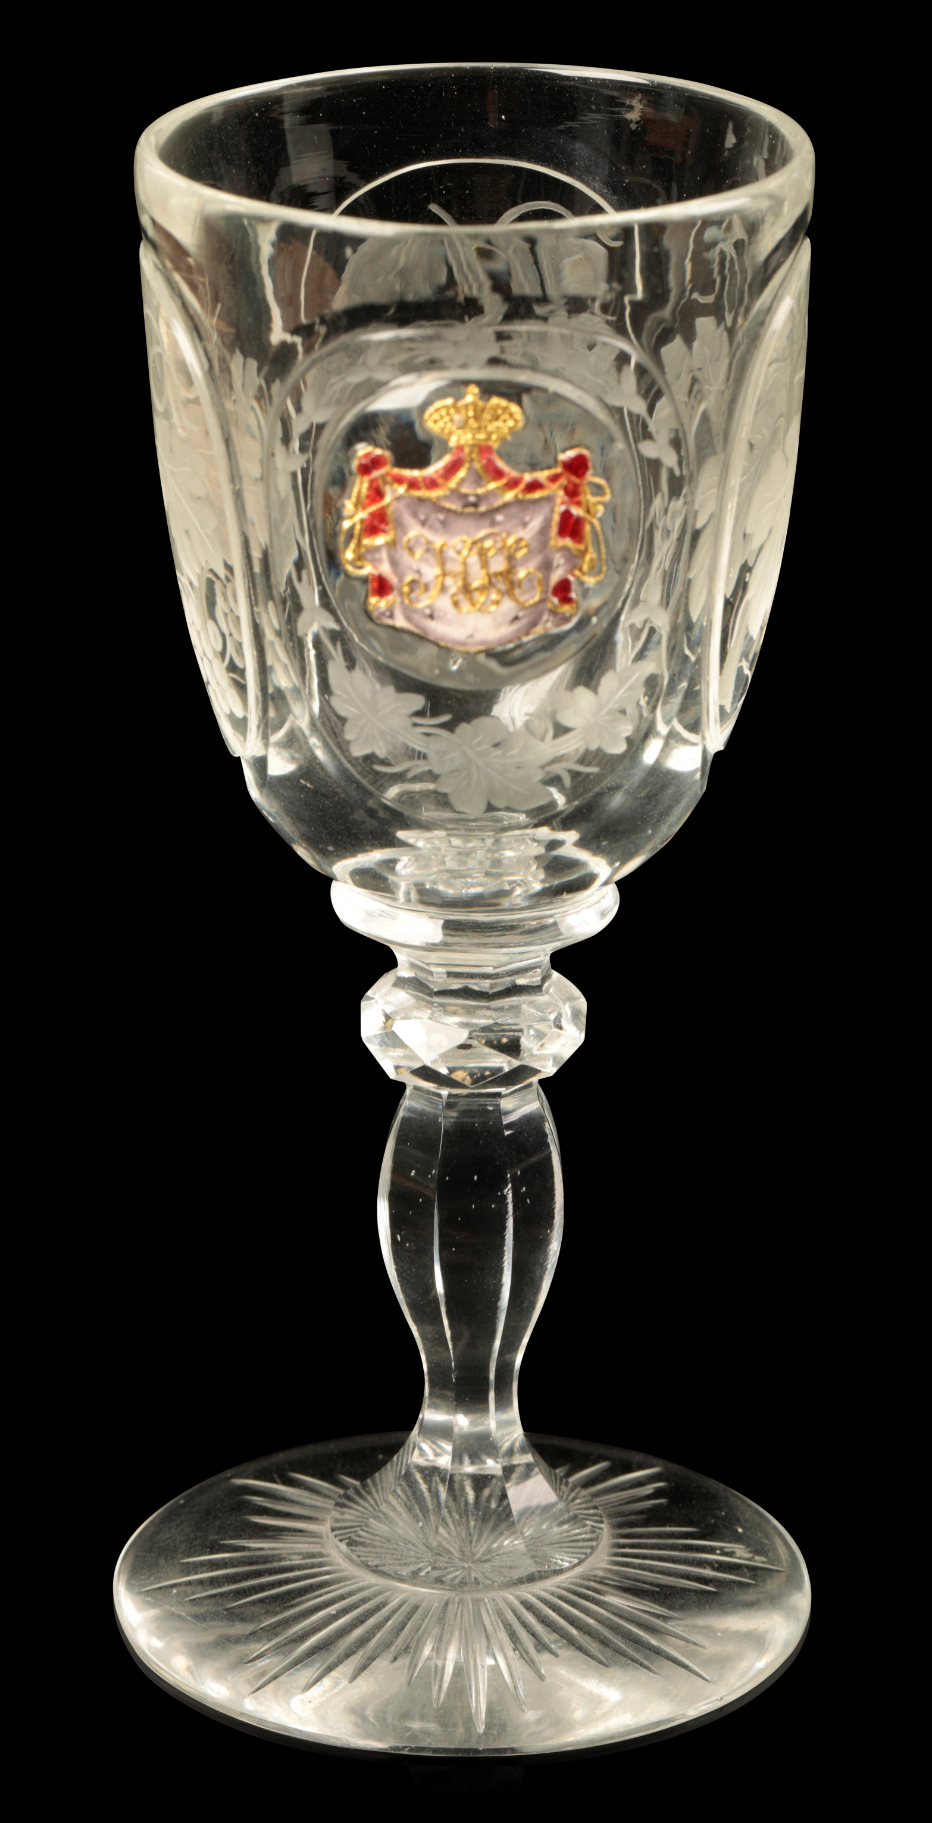 A RUSSIAN GLASS likely from the